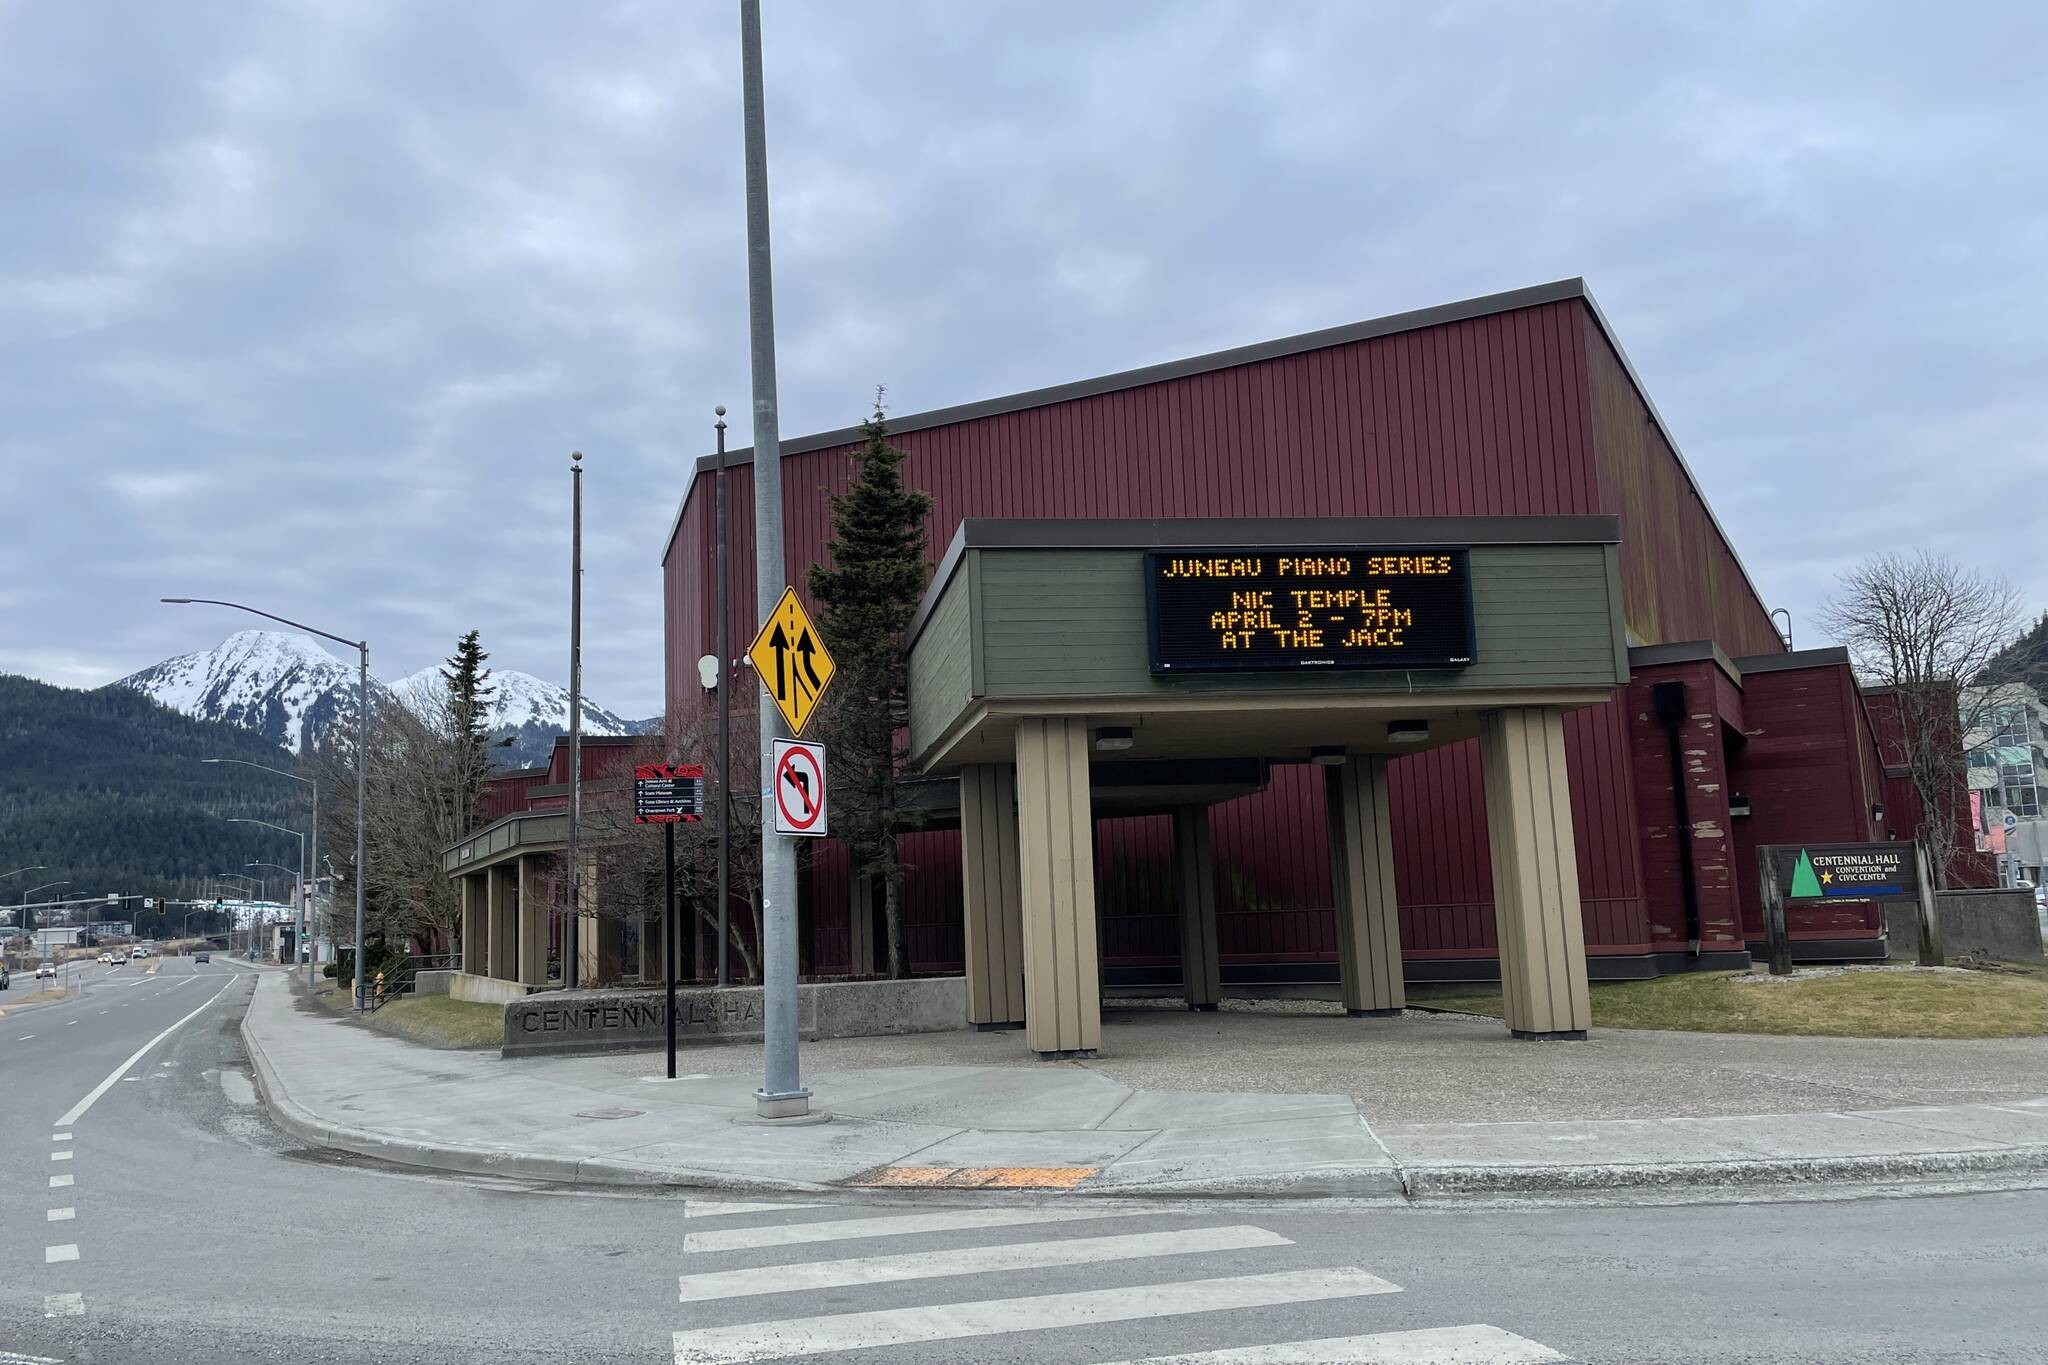 The Alaska Folk Festival will take place at Centennial Hall from April 4-10 after two years of being curtailed sharply by the pandemic. (Michael S. Lockett / Juneau Empire)